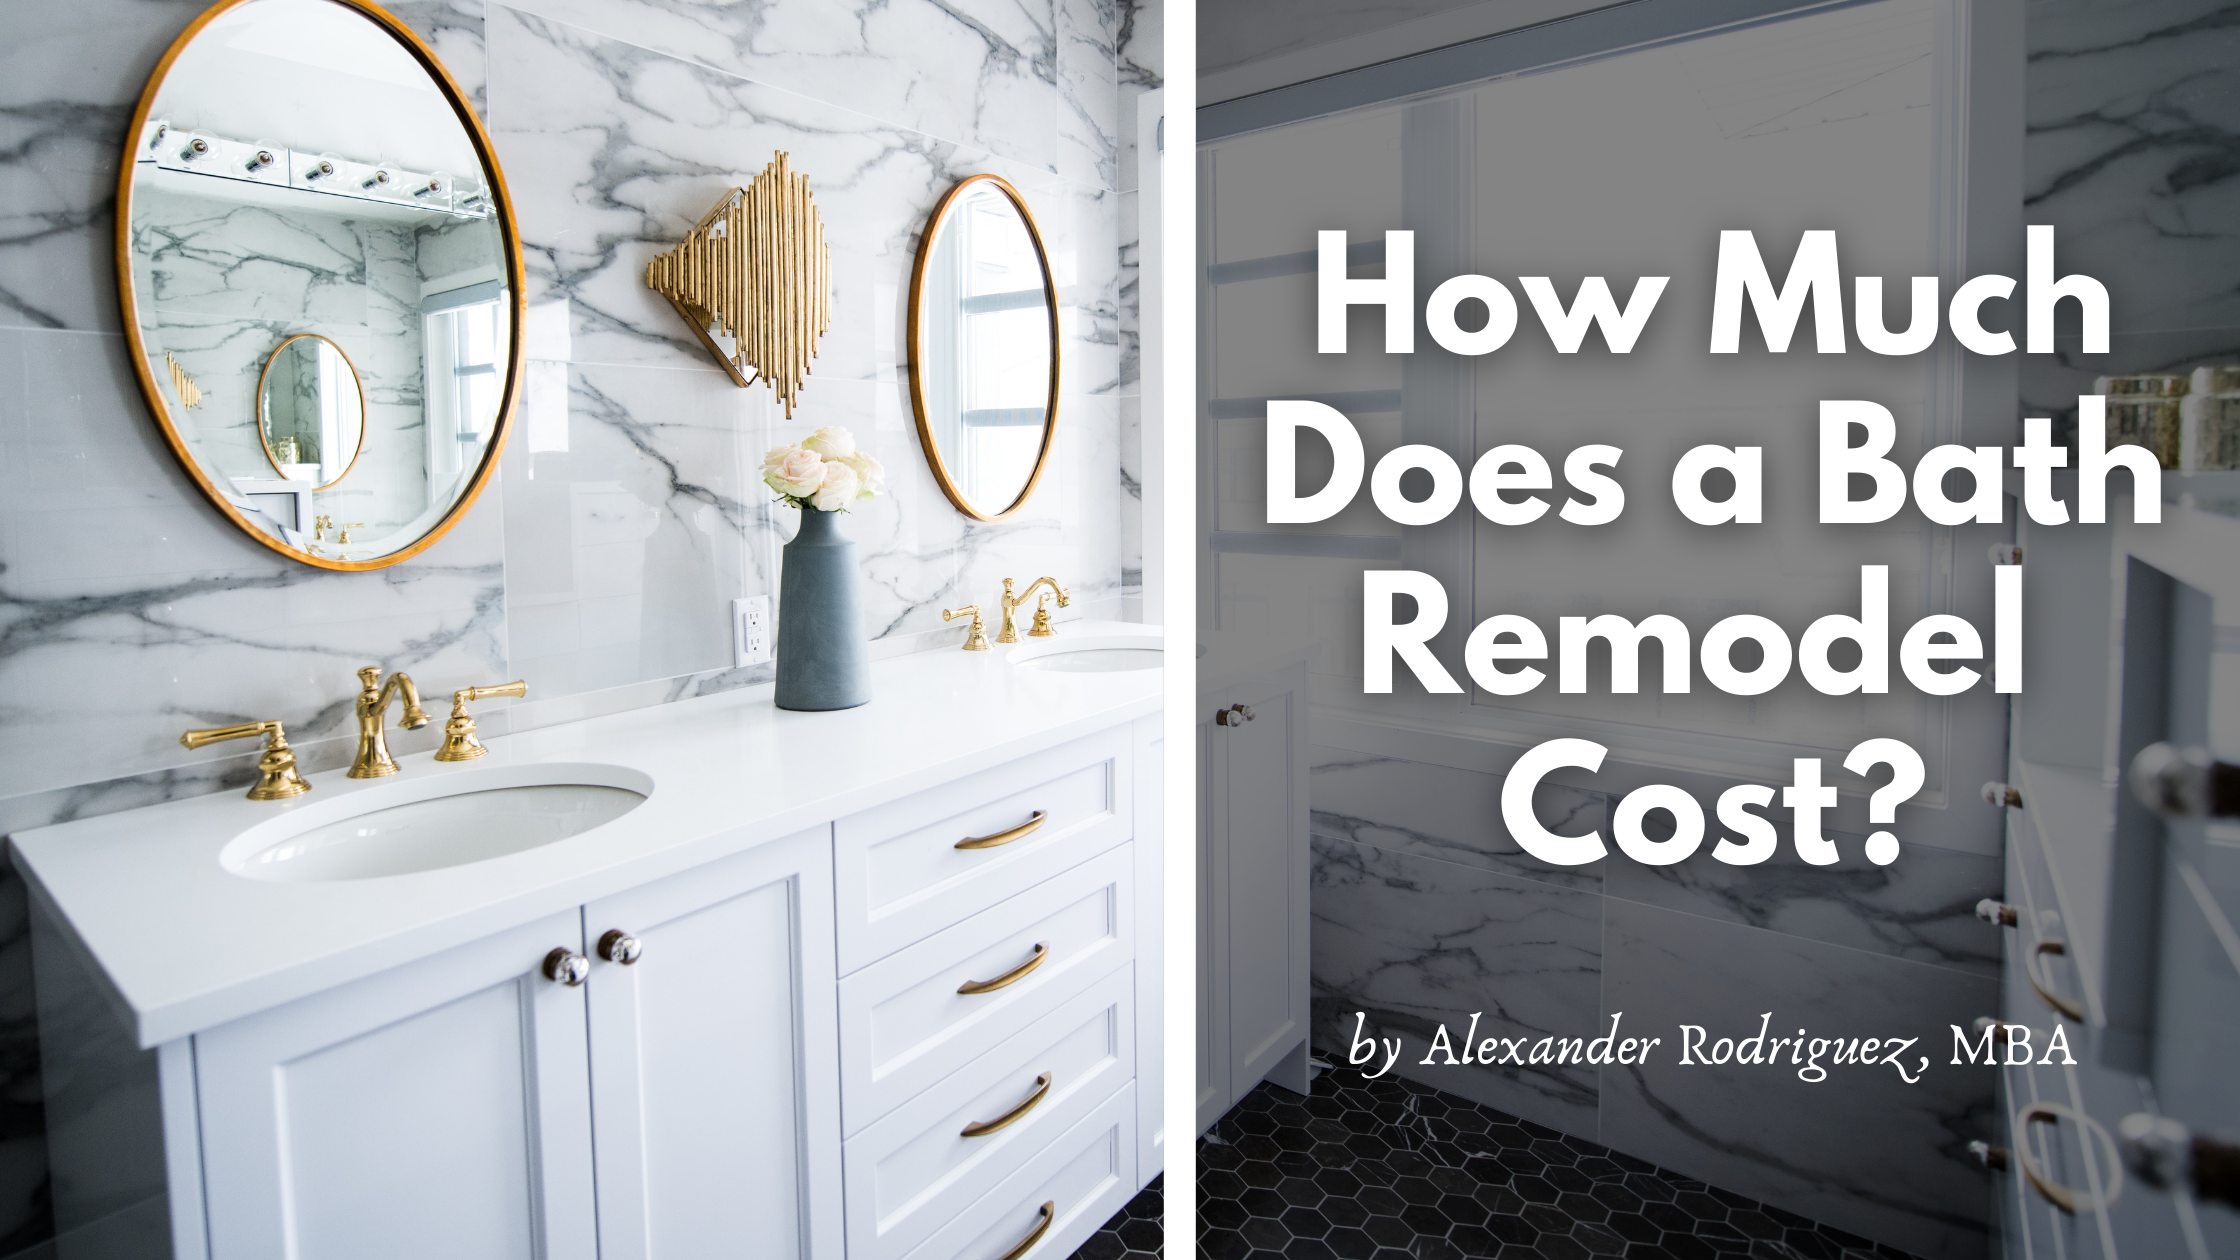 Blog - How Much Does a Bath Remodel Cost